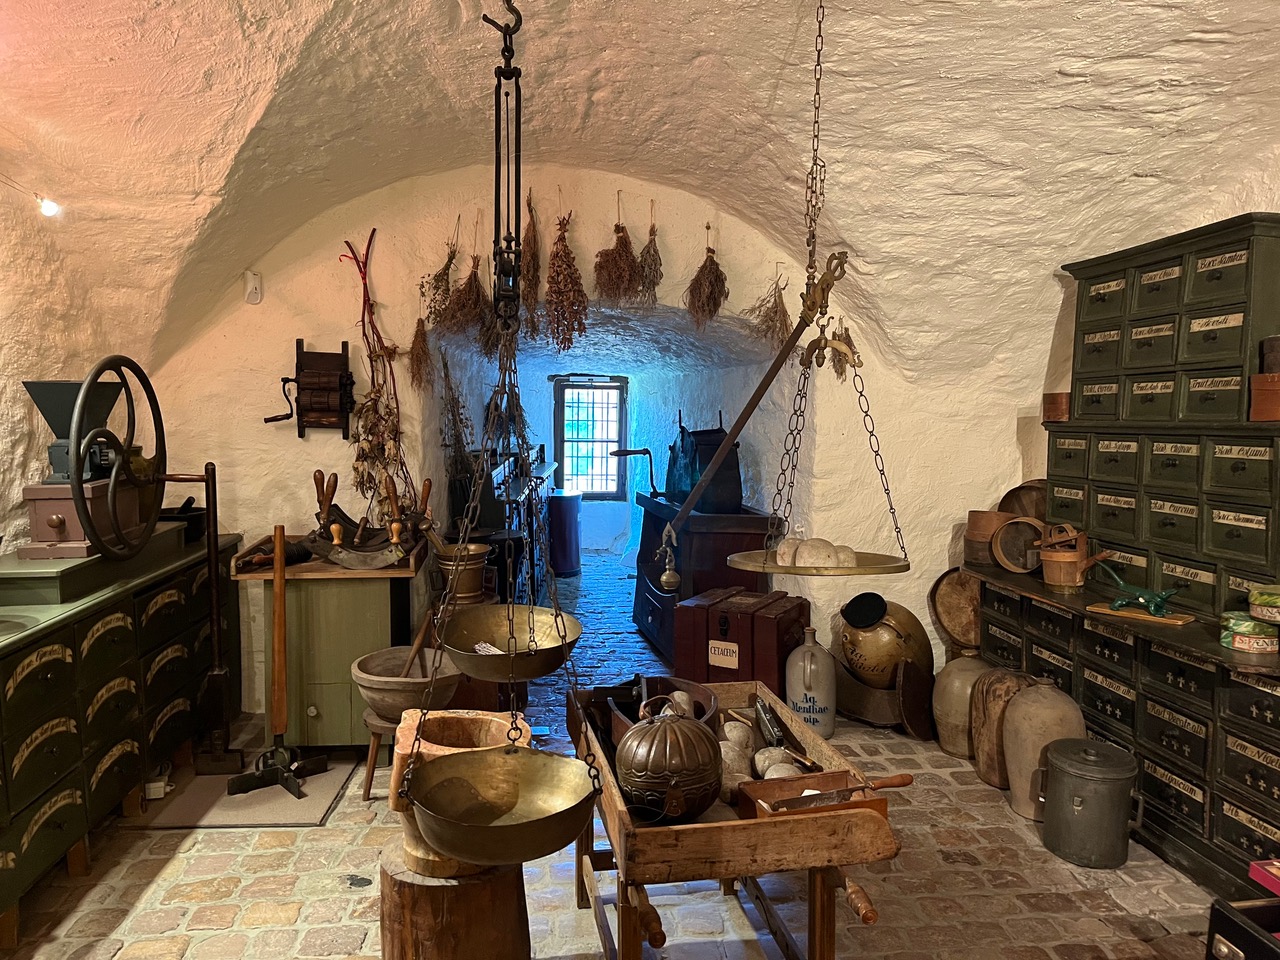 A workroom where medicines and remedies were made